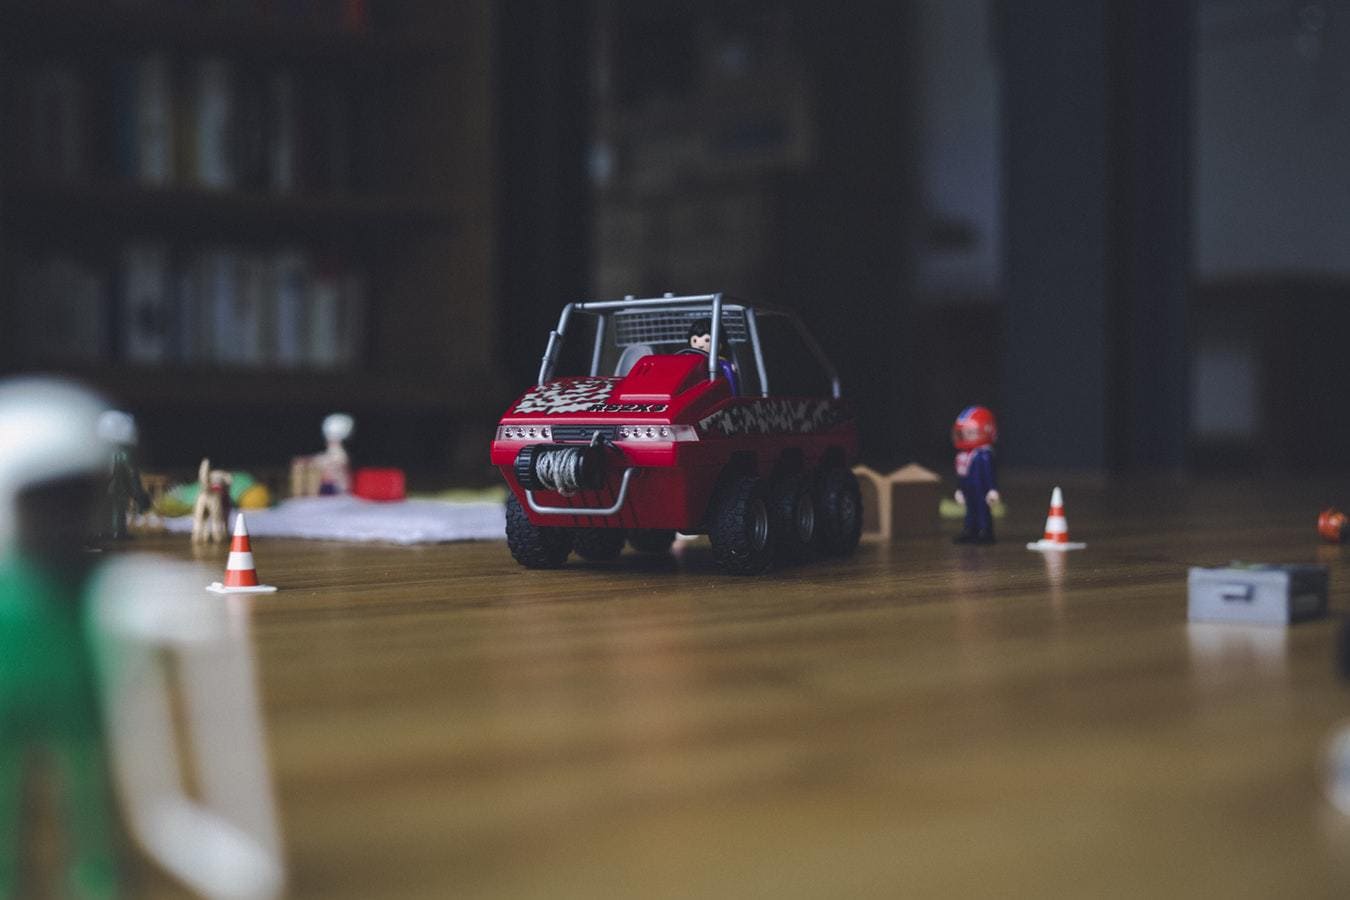 Top 25 Miniature Photography Cars, Scooter Backgrounds Wallpapers, Vintage car Miniature Photography Wallpapers For Facebook, Miniature Photography Images For WhatsApp Status, Car Wallpapers, Scooter Wallpapers, Mini Van Wallpapers, Vintage car Wallpapers, Beautiful Cars Wallpapers & Images